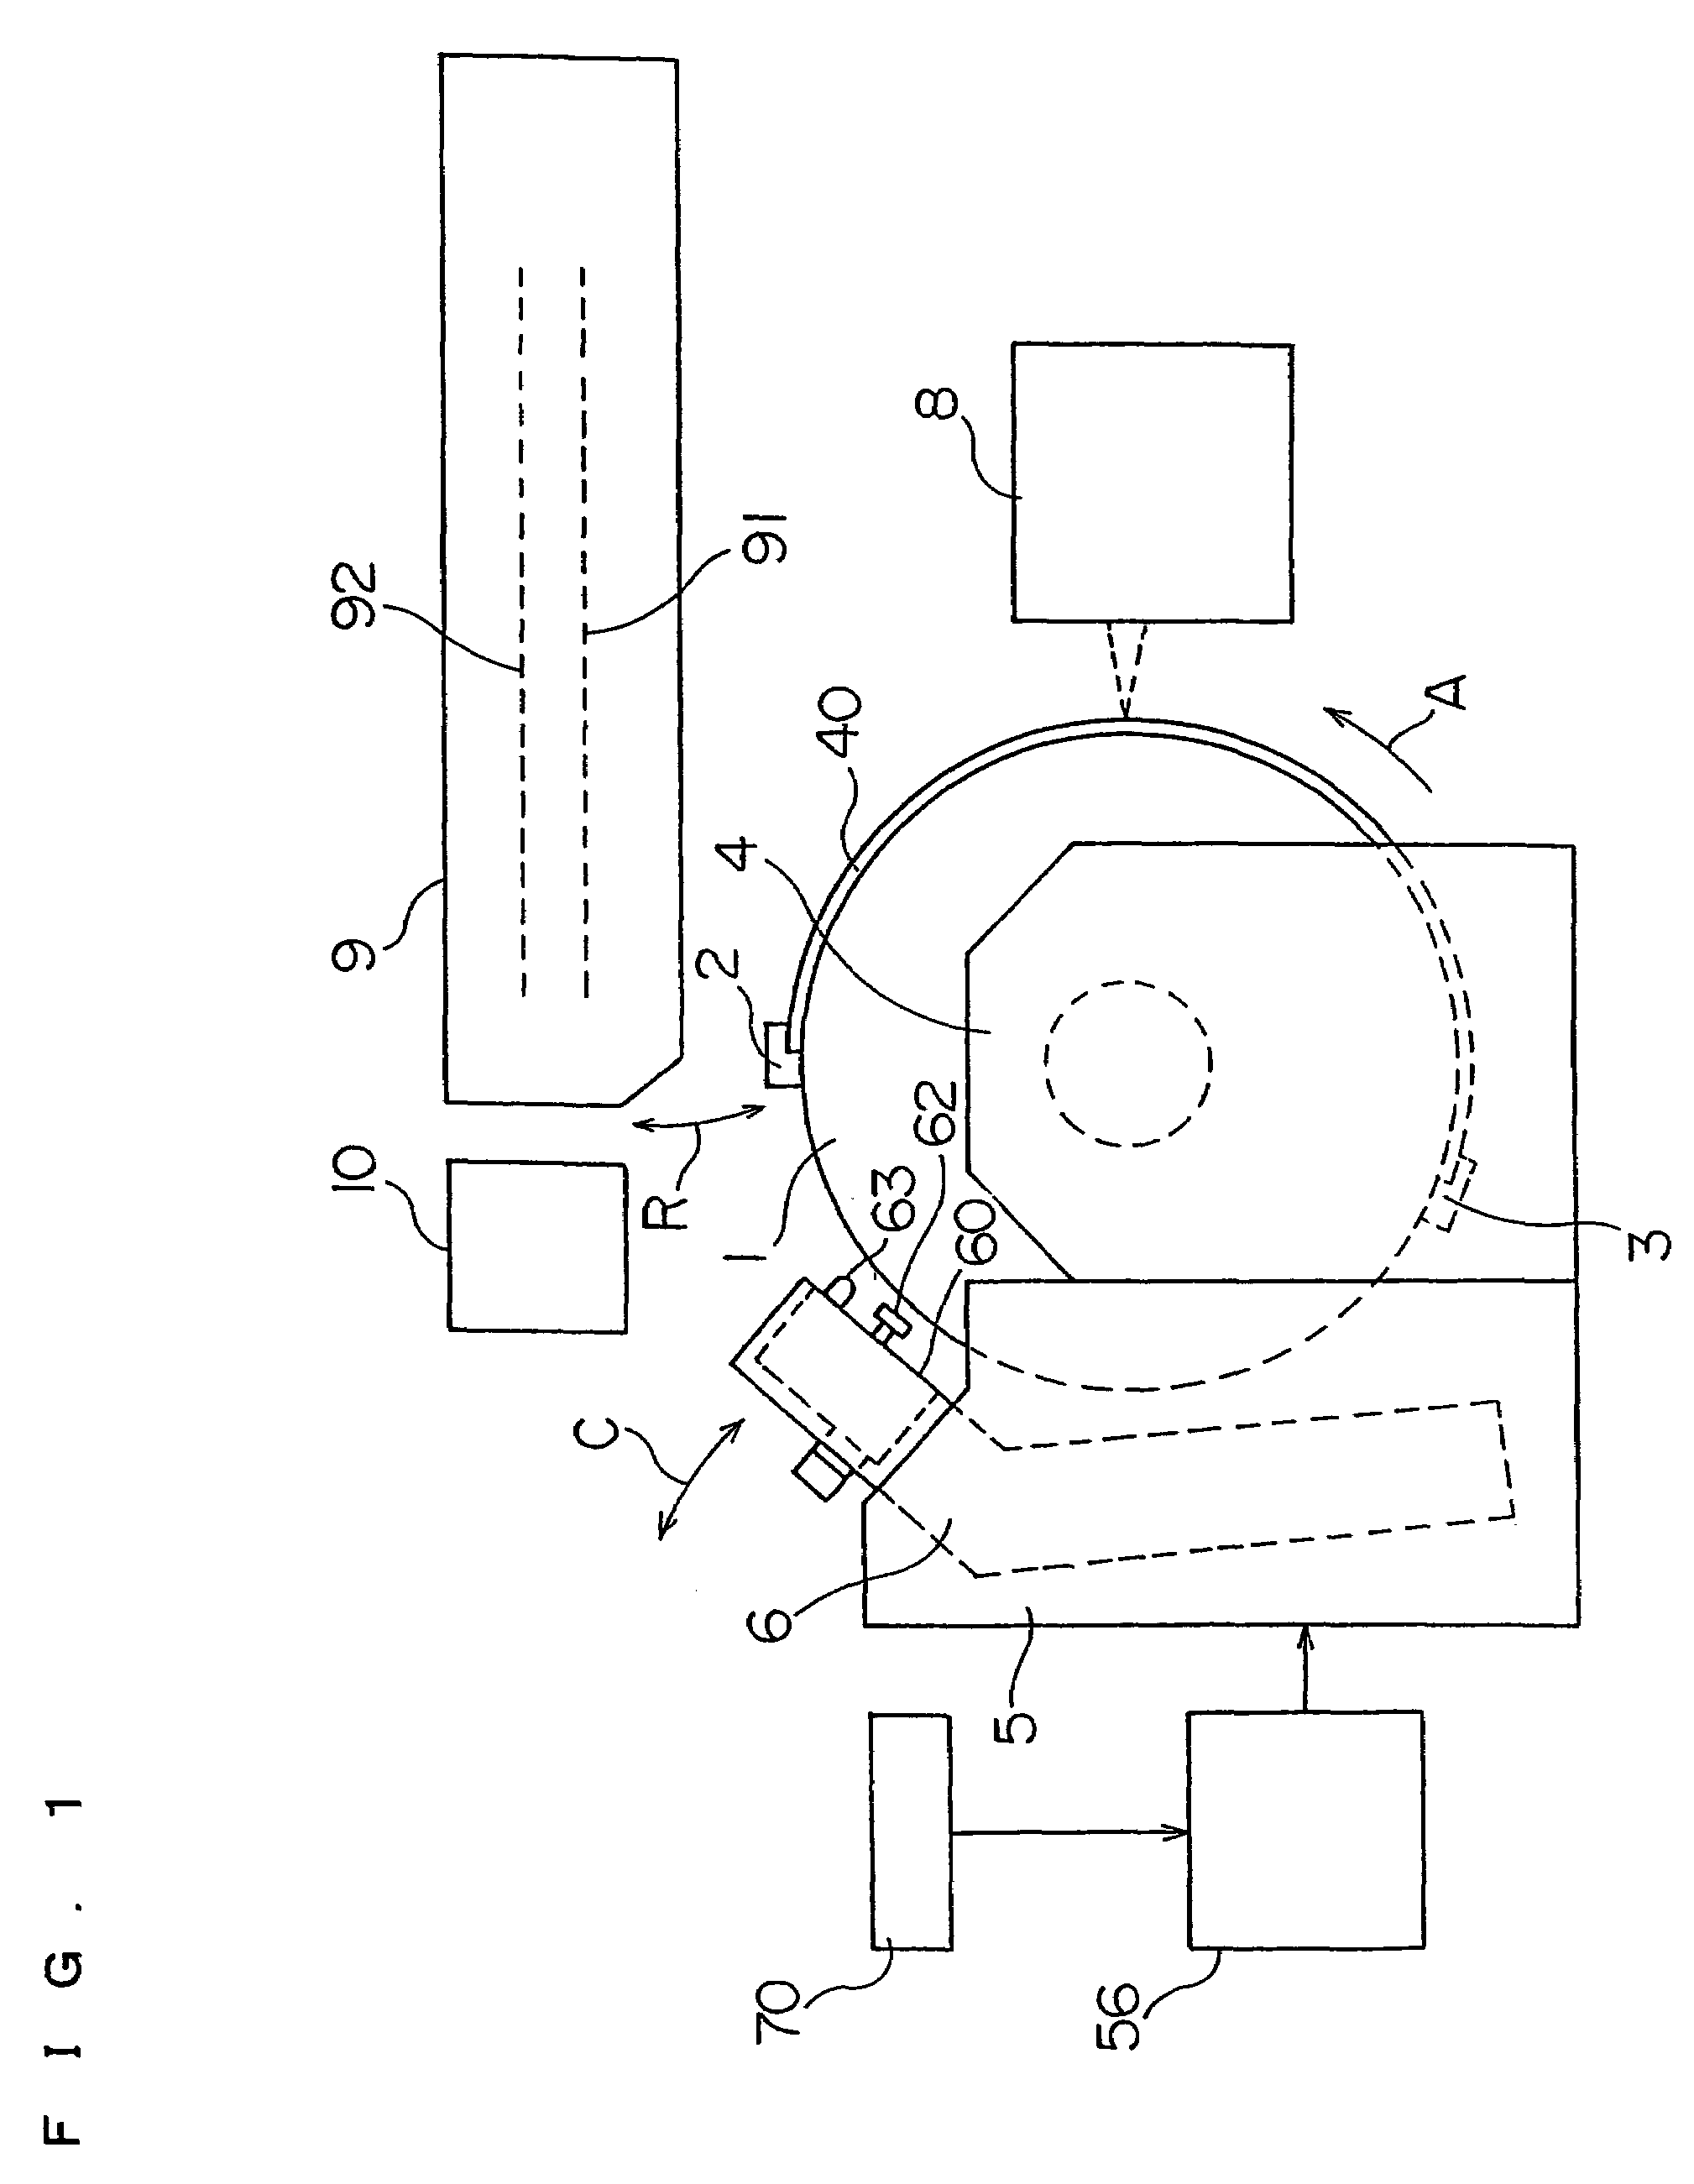 Image recording apparatus with jet and suction